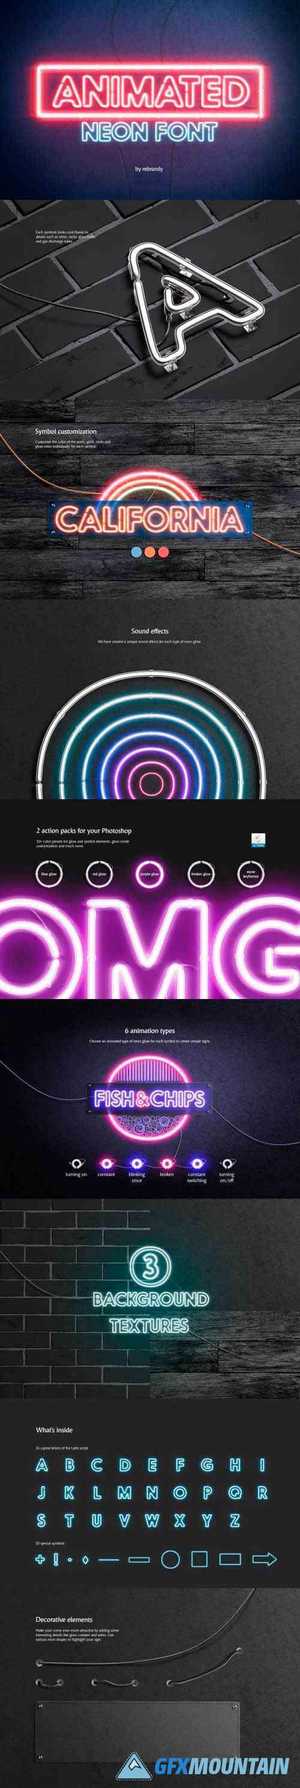 Animated Neon Font 5422893